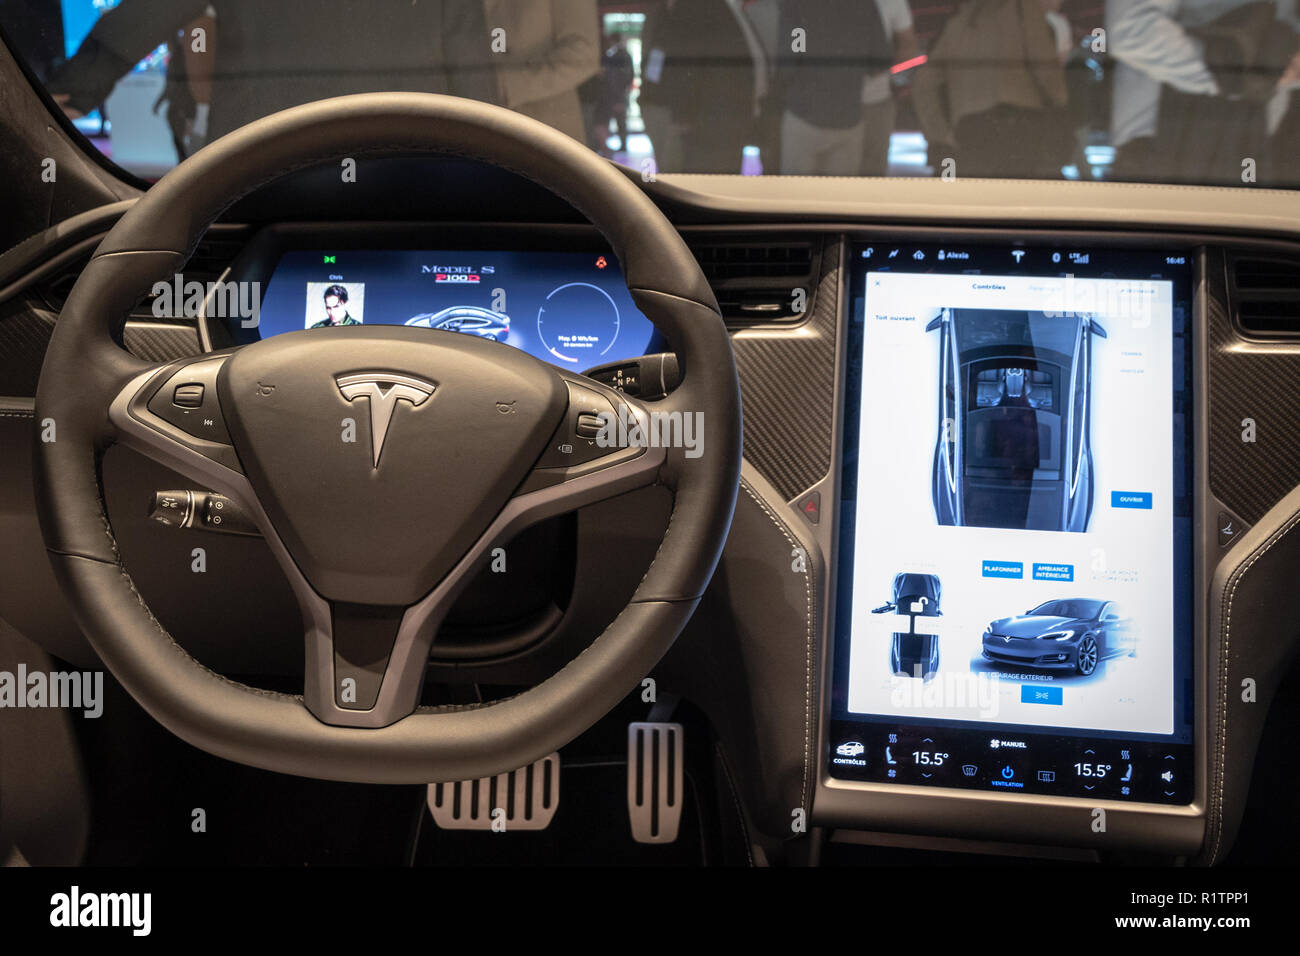 PARIS - OCT 3, 2018: Interior dashboard view of theTesla Model S P100D electric car showcased at the Paris Motor Show. Stock Photo